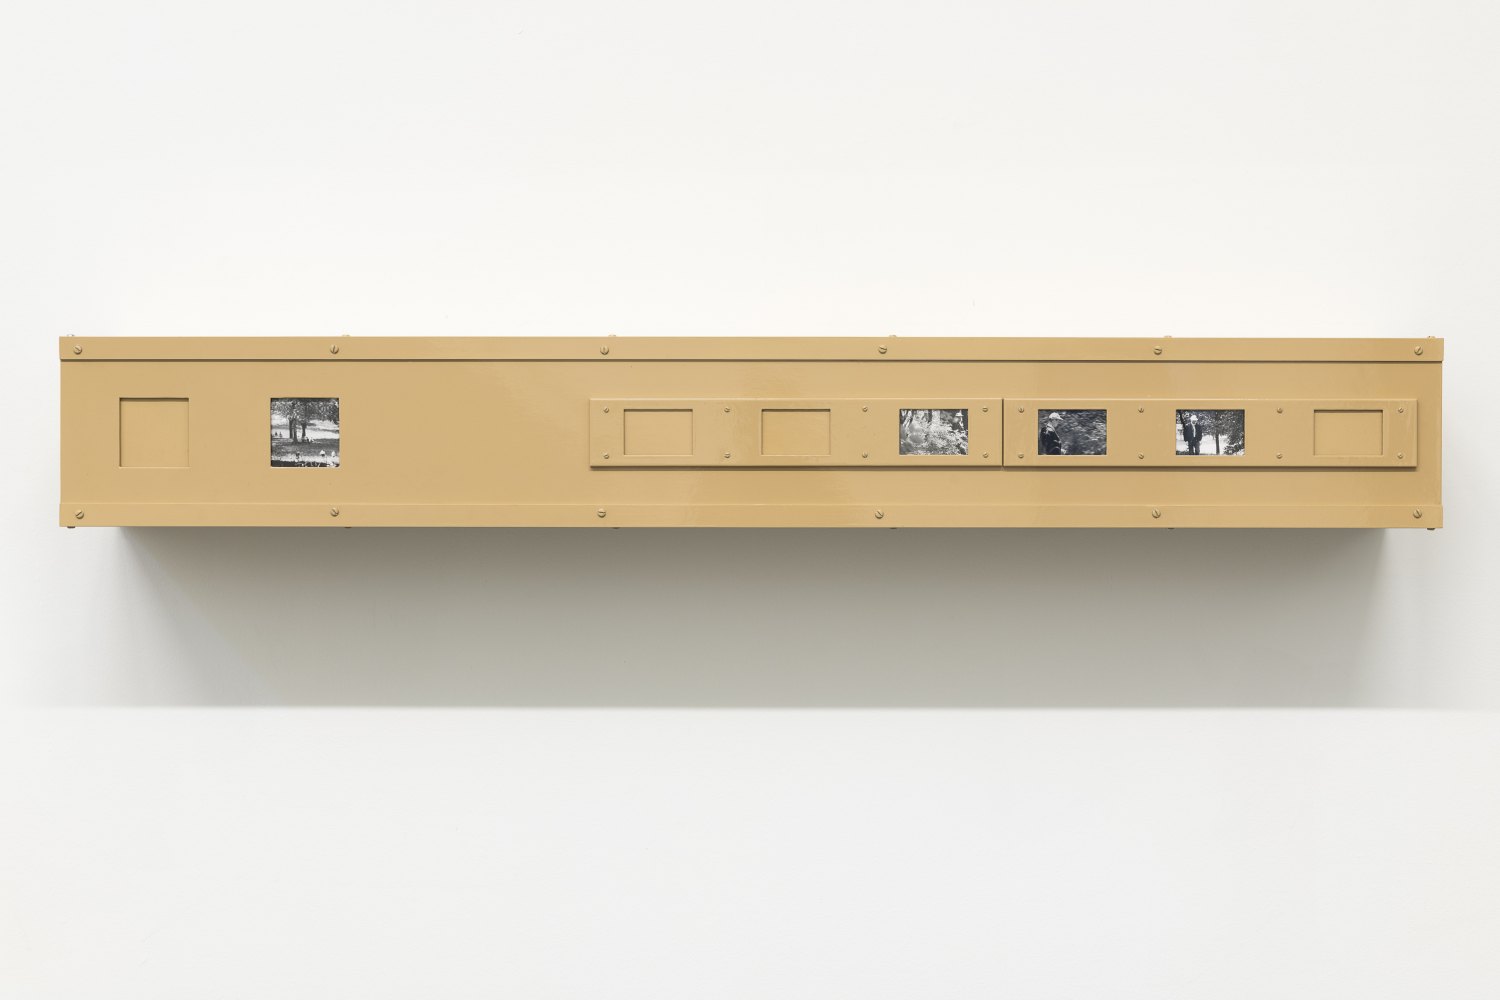 Tom Burr Prospect Park: a documentary in four parts (part two), 1989 Enamel, wood, steel, aluminium, photographic inserts, 20  x 152 x 24 cm